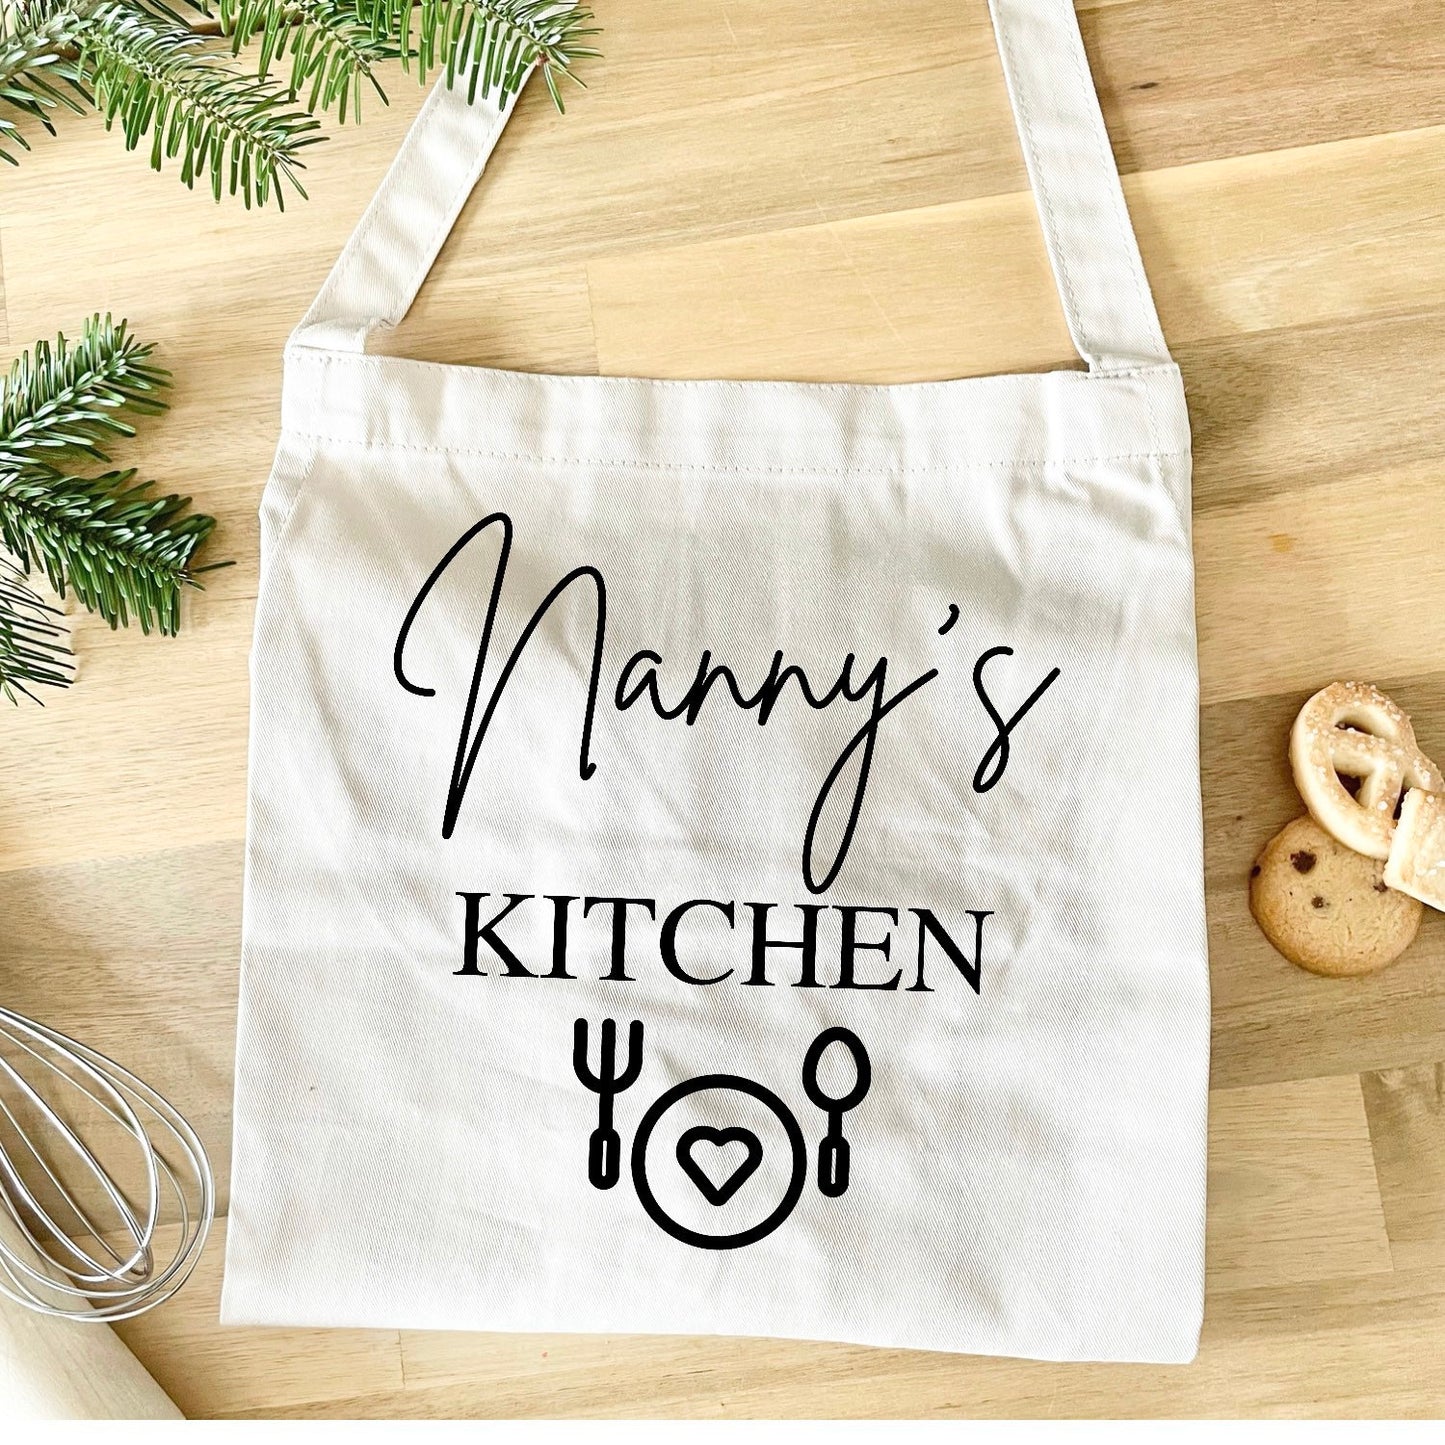 Personalised apron, nanny’s kitchen apron, Mother’s Day gifts for mums and grandma, nan birthday present, home chef apron